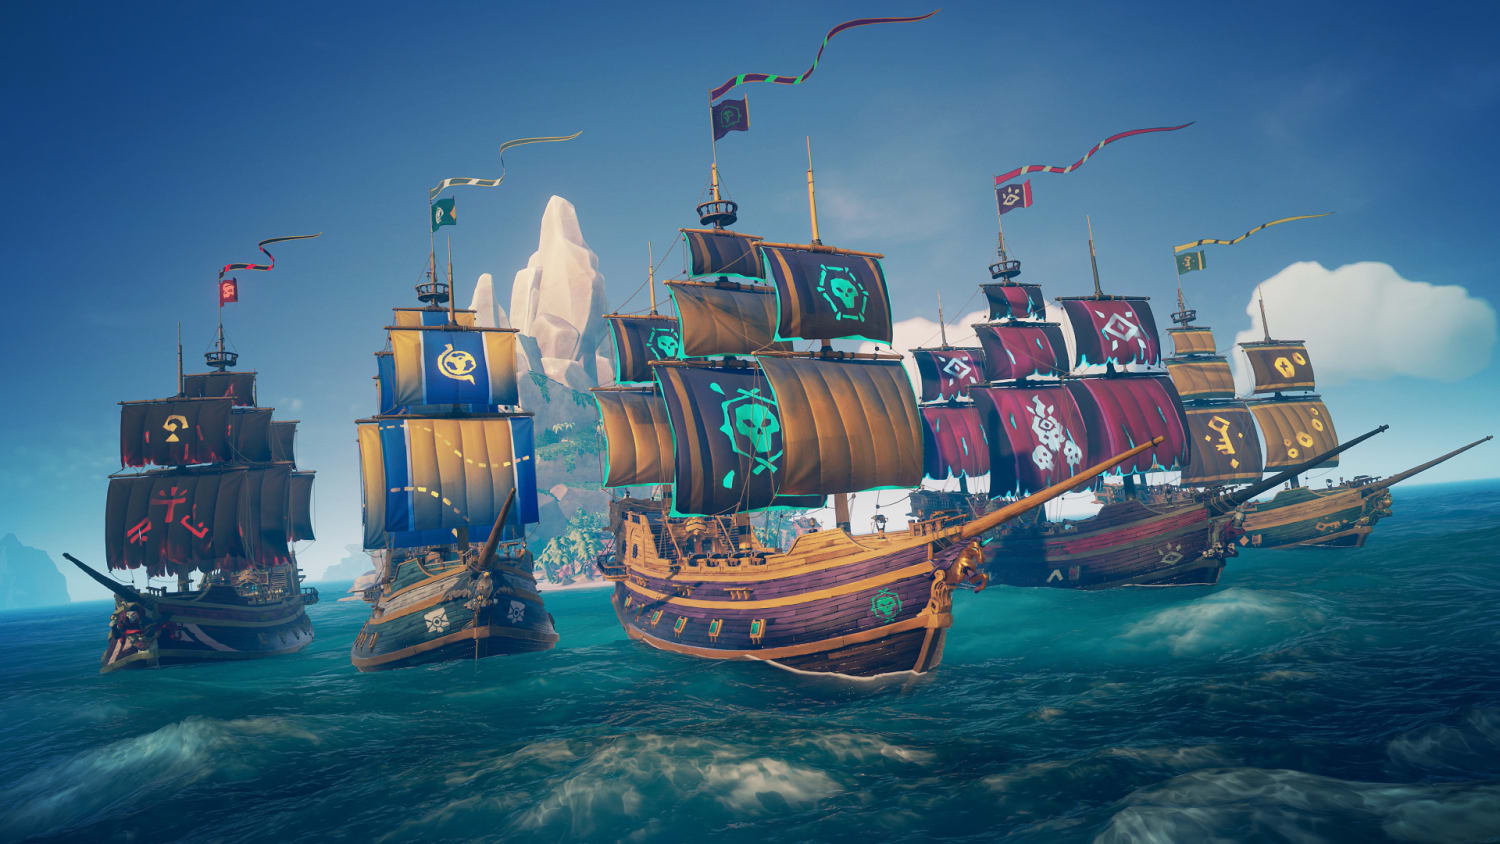 Sea Of Thieves Patch Notes 2.1.1: New Cosmetics, Bug Fixes, and More